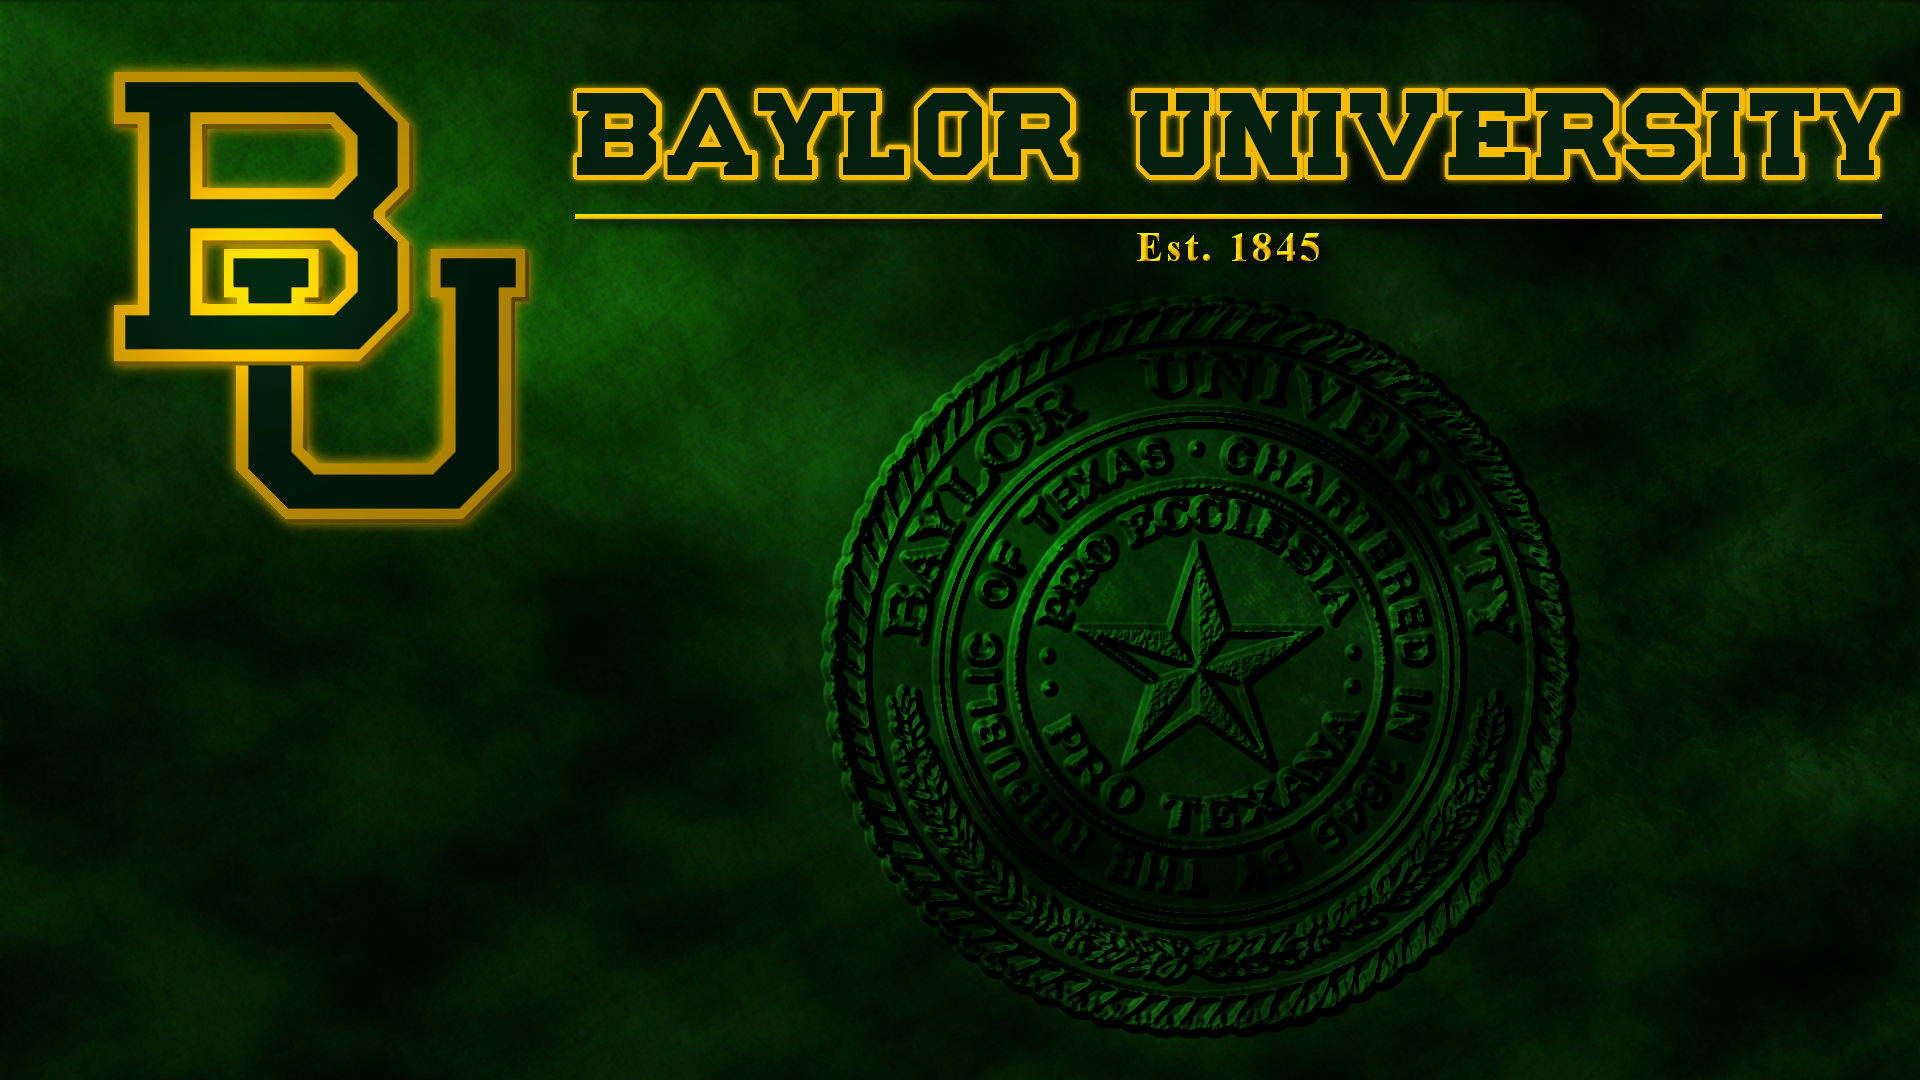 Baylor Wallpapers Browser Themes More for Bears Fans 1920x1080